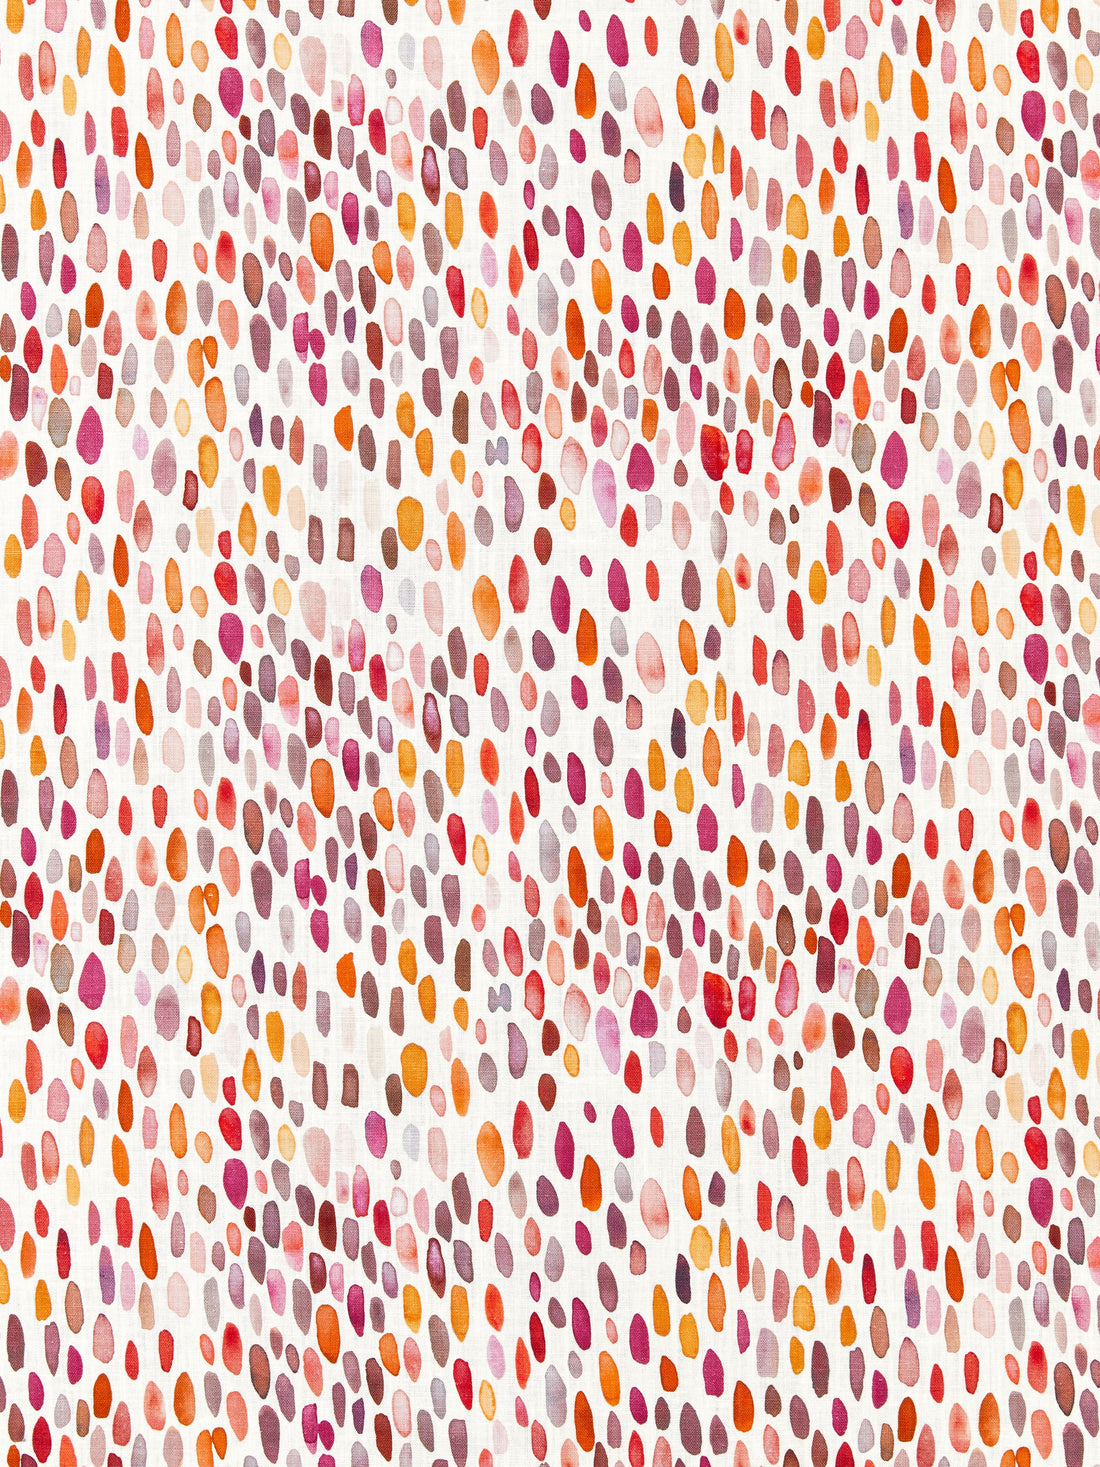 Jamboree Linen Print fabric in wild berry color - pattern number LO 00075096 - by Scalamandre in the Old World Weavers collection